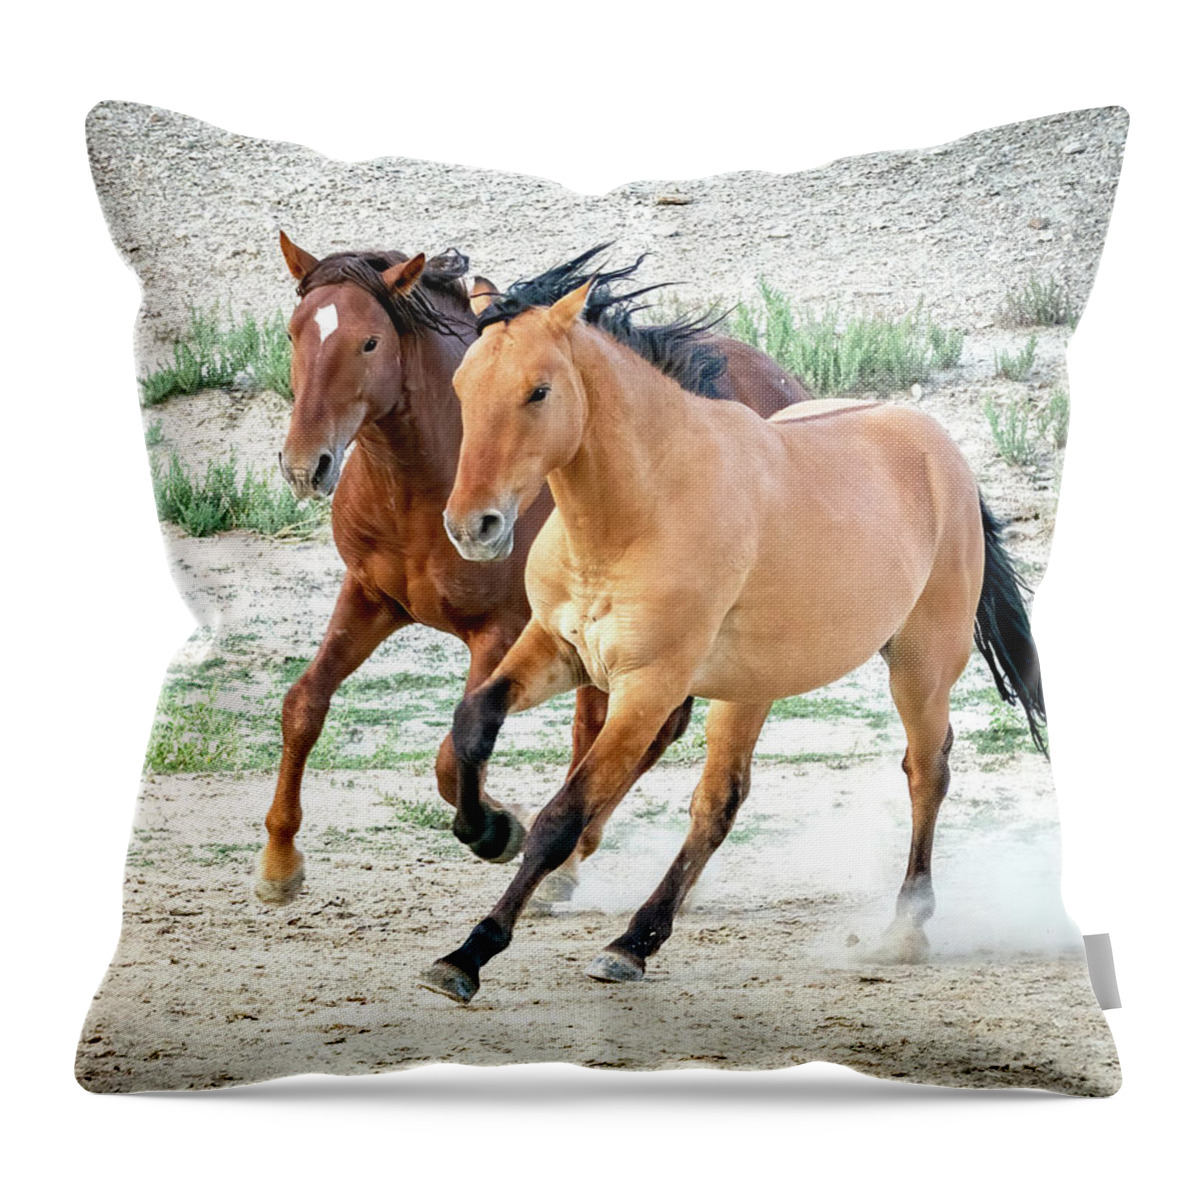 Wild Mustangs Throw Pillow featuring the photograph Two Wild Horse Buddies by Judi Dressler